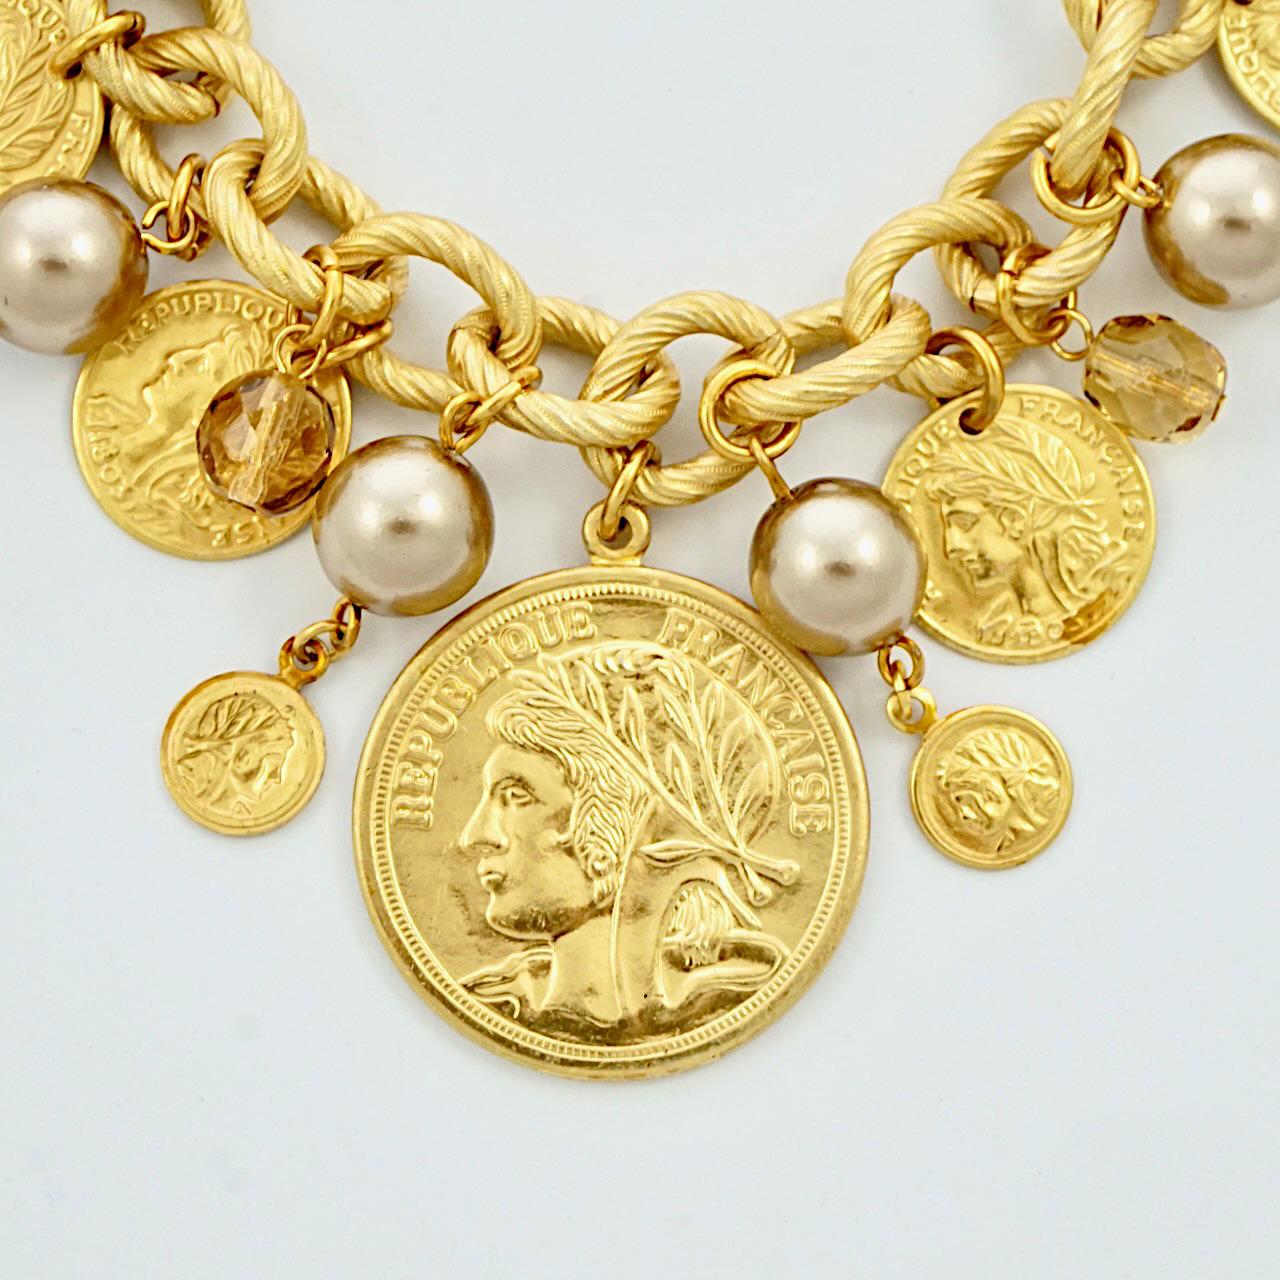 Fabulous Miriam Haskell Russian gold plated charm bracelet, with pale gold faux pearls and faceted citrine glass, and Greek and French decorative coins. Measuring length 20.3 cm / 8 inches, and the largest coin is diameter 2.9 cm / 1.14 inch. The